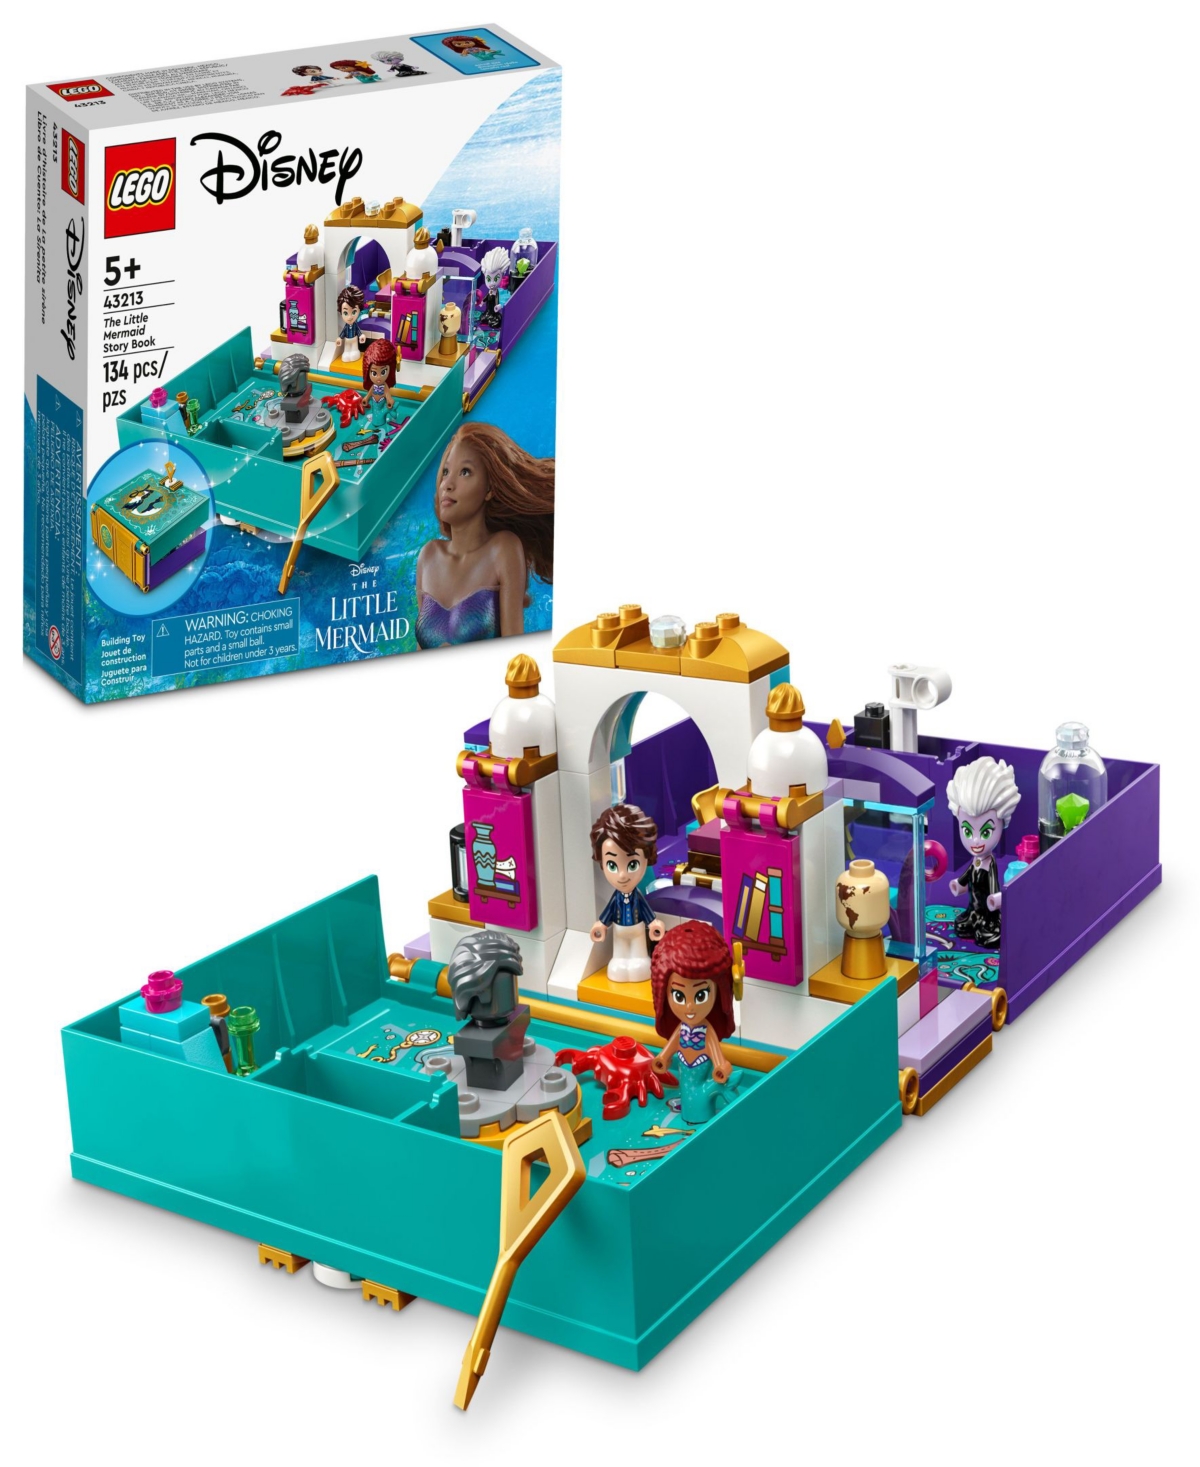 Lego Disney 43213 Princess The Little Mermaid Story Book Toy Building Set With Ariel, Prince Eric, Ursula In Multicolor